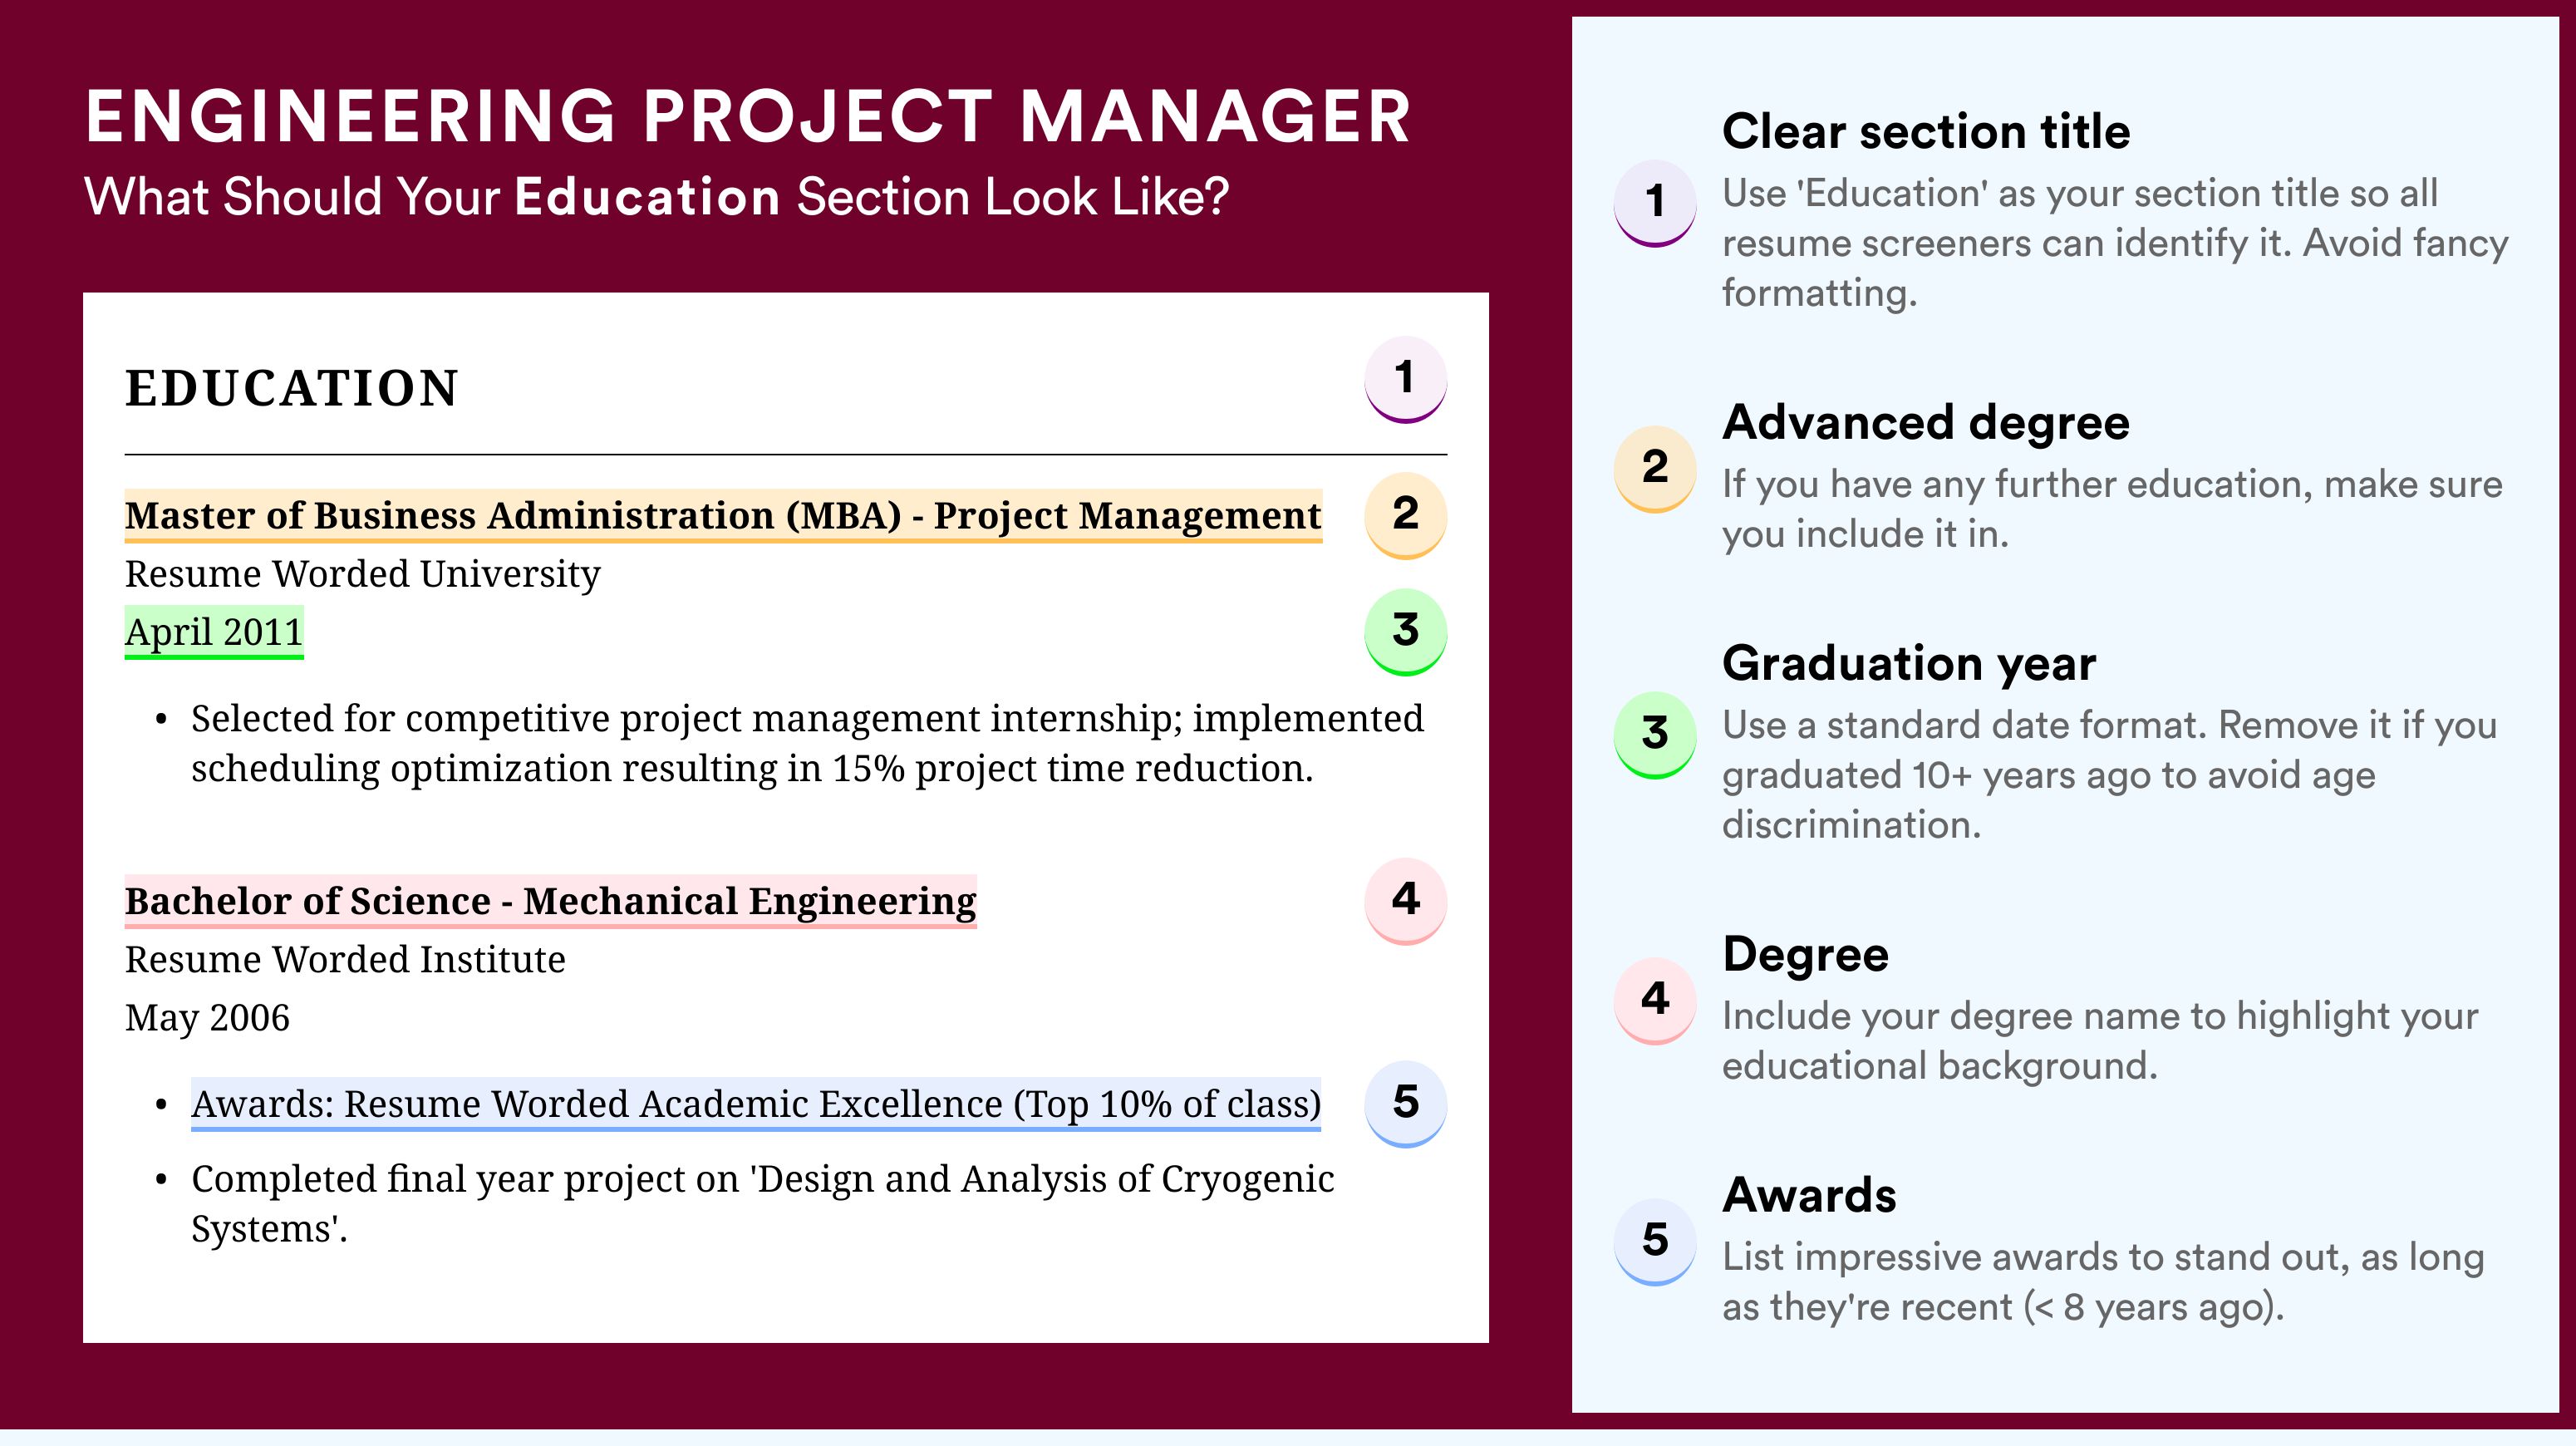 How To Write An Education Section - Engineering Project Manager Roles